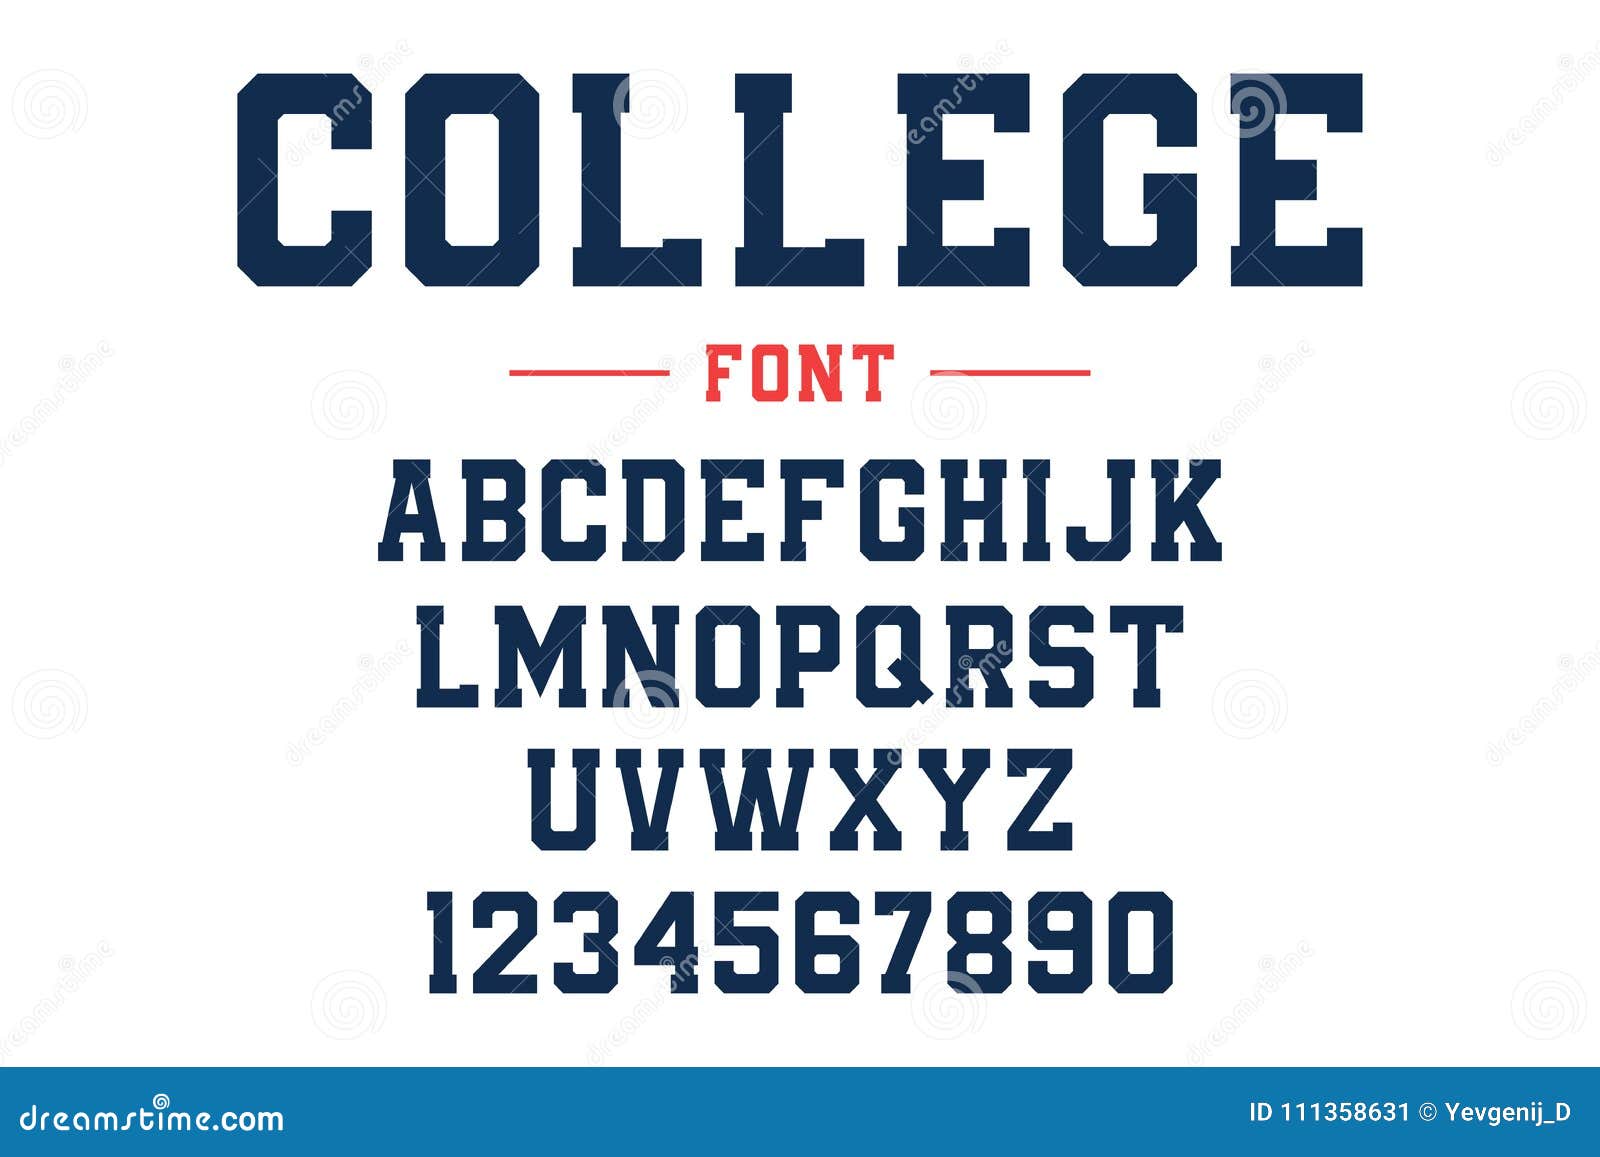 Classic College Font. Vintage Sport Font in American Style for Football,  Baseball or Basketball Logos and T-shirt Stock Vector - Illustration of  embroidery, jersey: 111358631